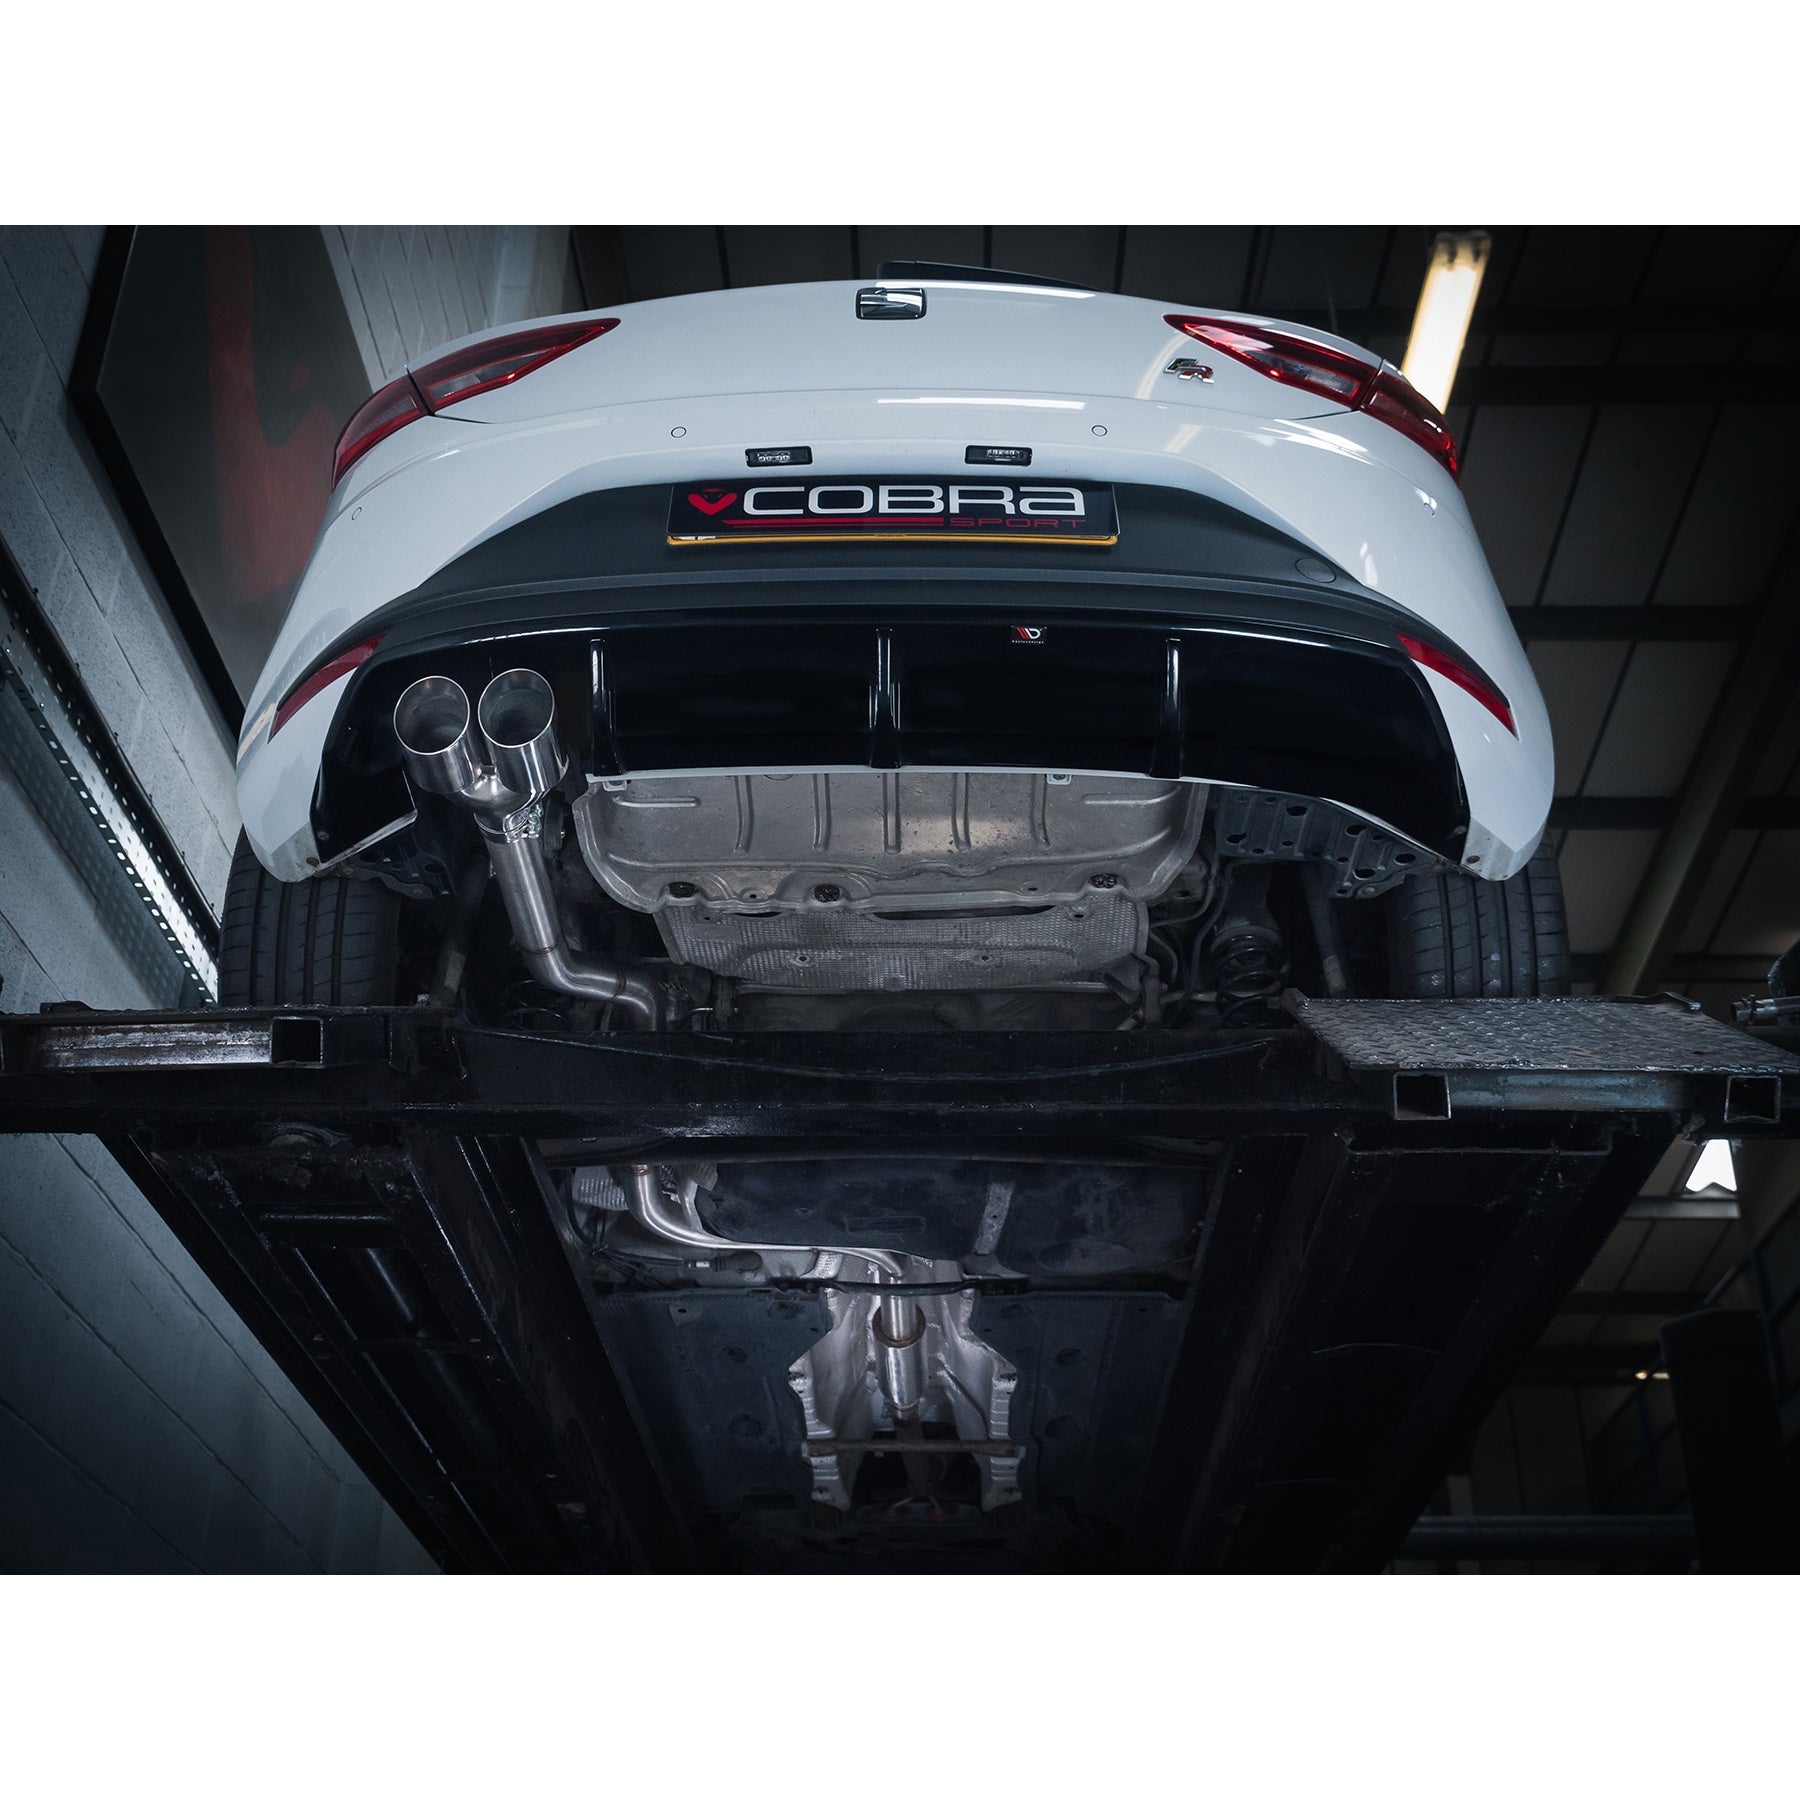 Performance sport exhaust for CUPRA LEON e-Hybrid 1.4 TSI, CUPRA LEON  e-Hybrid 1.4 TSI (245 Hp - models with GPF) 2021 -> (Multilink rear  suspension), Cupra, exhaust systems